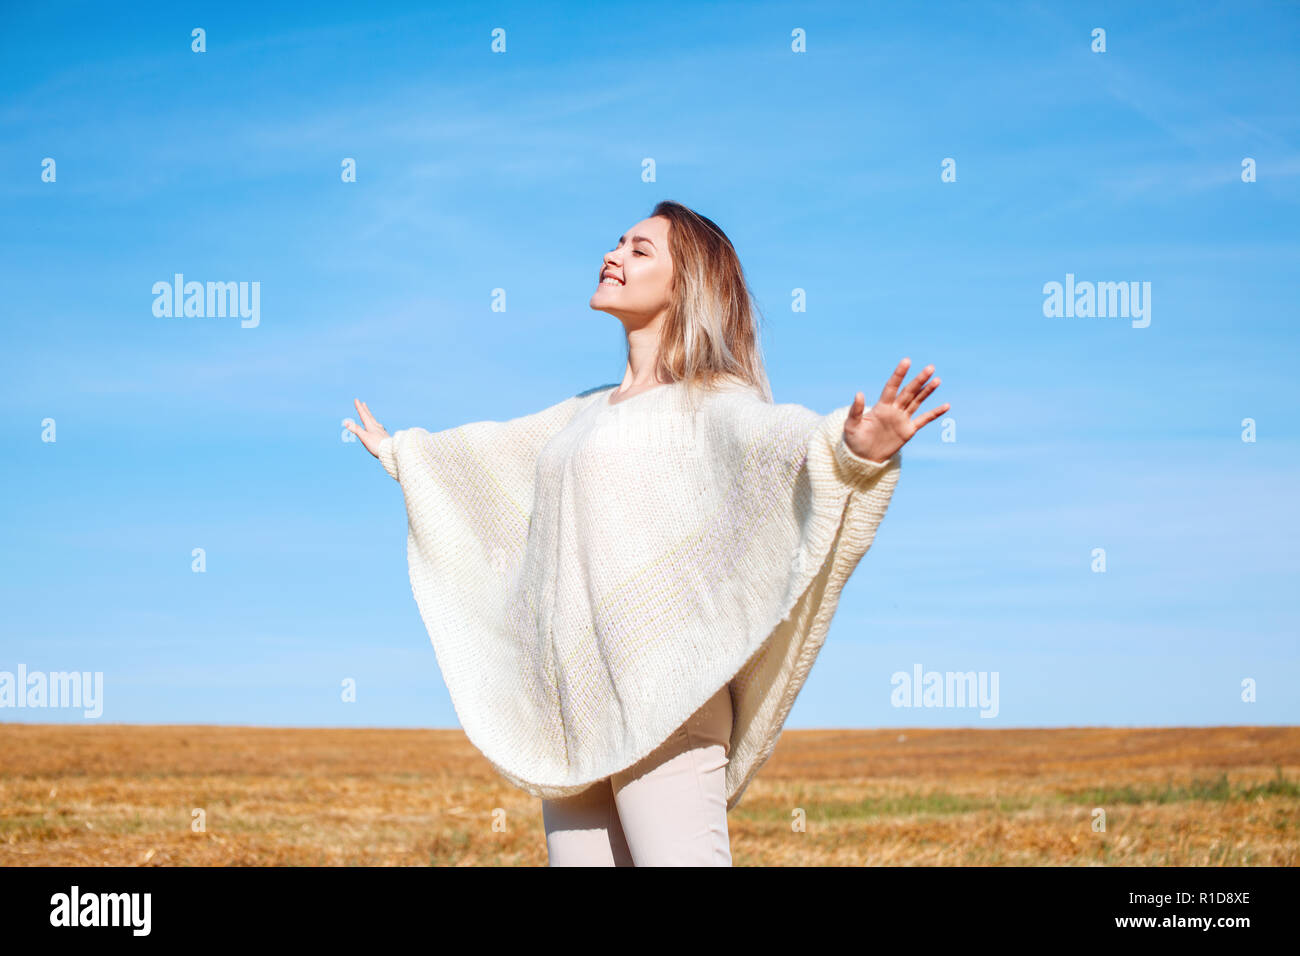 Cheerful girl with raised hands on the field in warm autumn season. Stock Photo